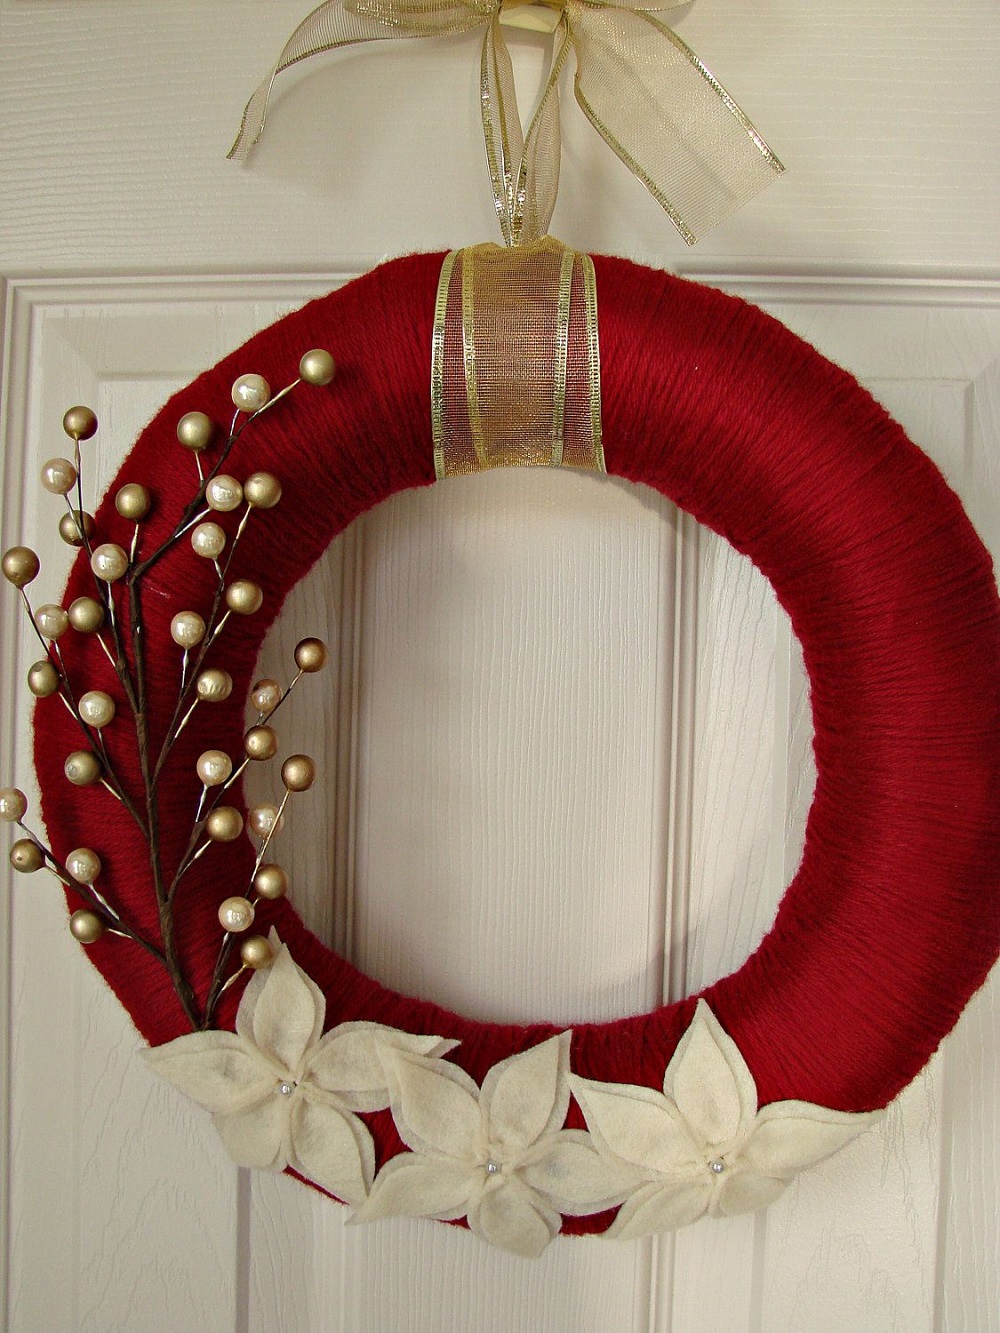 t3-82 Modern Christmas wreaths that you can decorate your home with